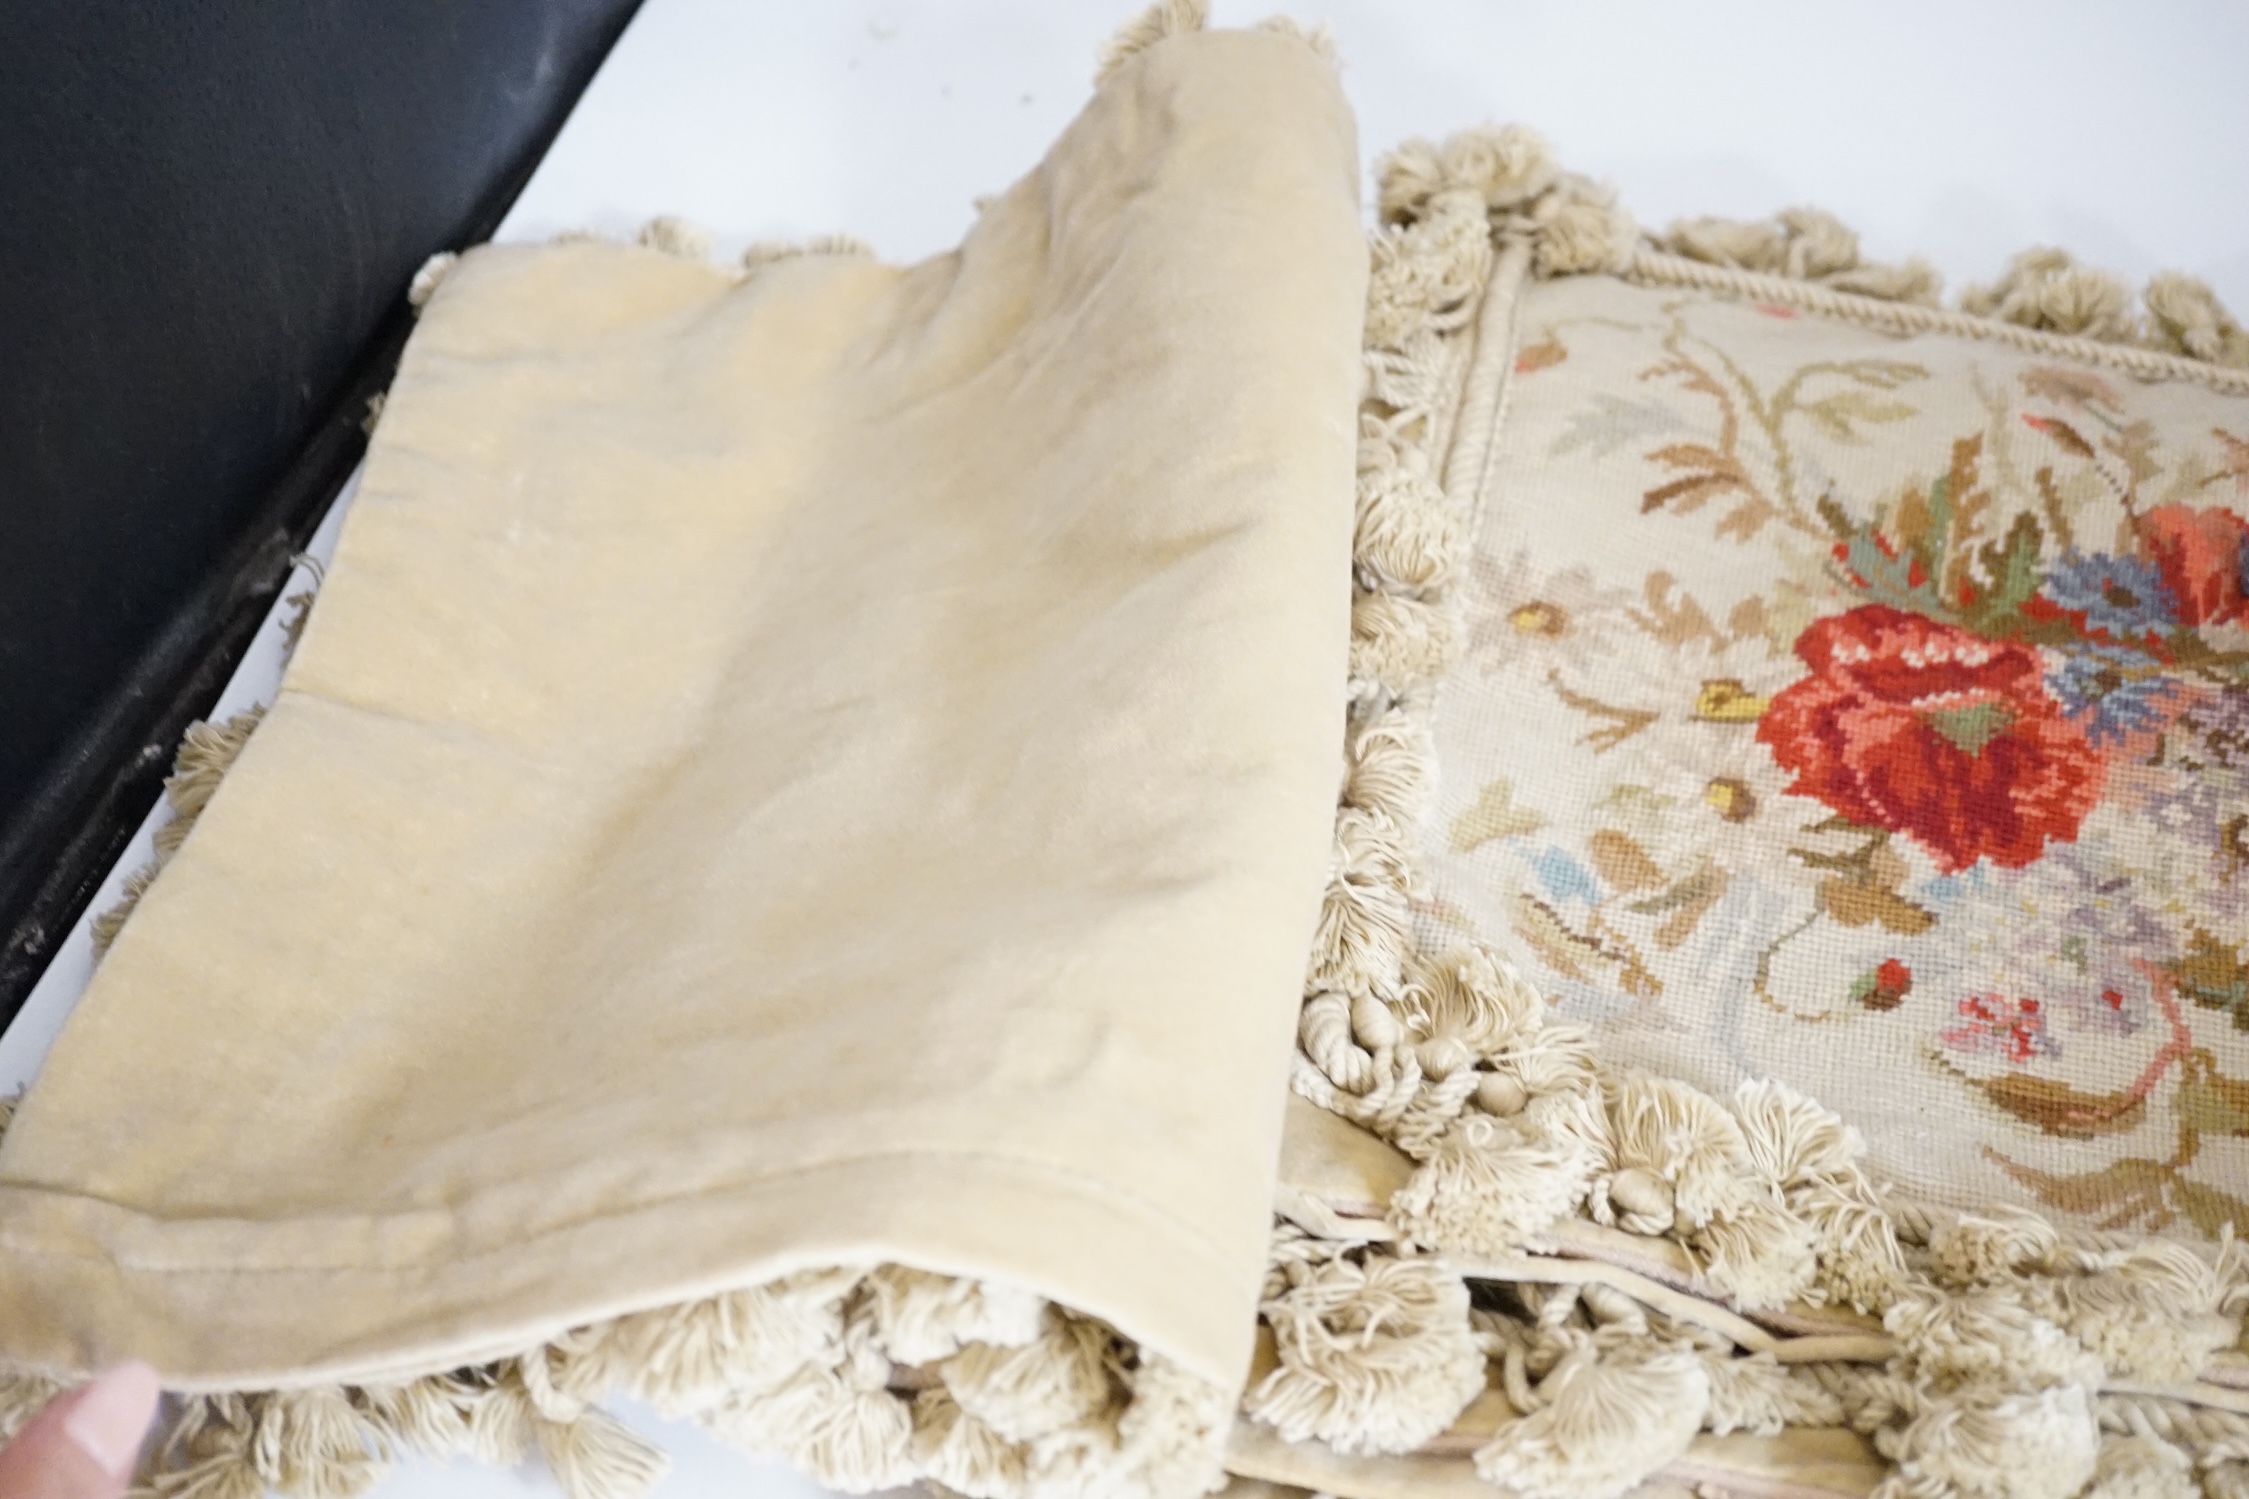 Five square wool worked cushion covers designed with wild flowers, bordered with tasselled braiding